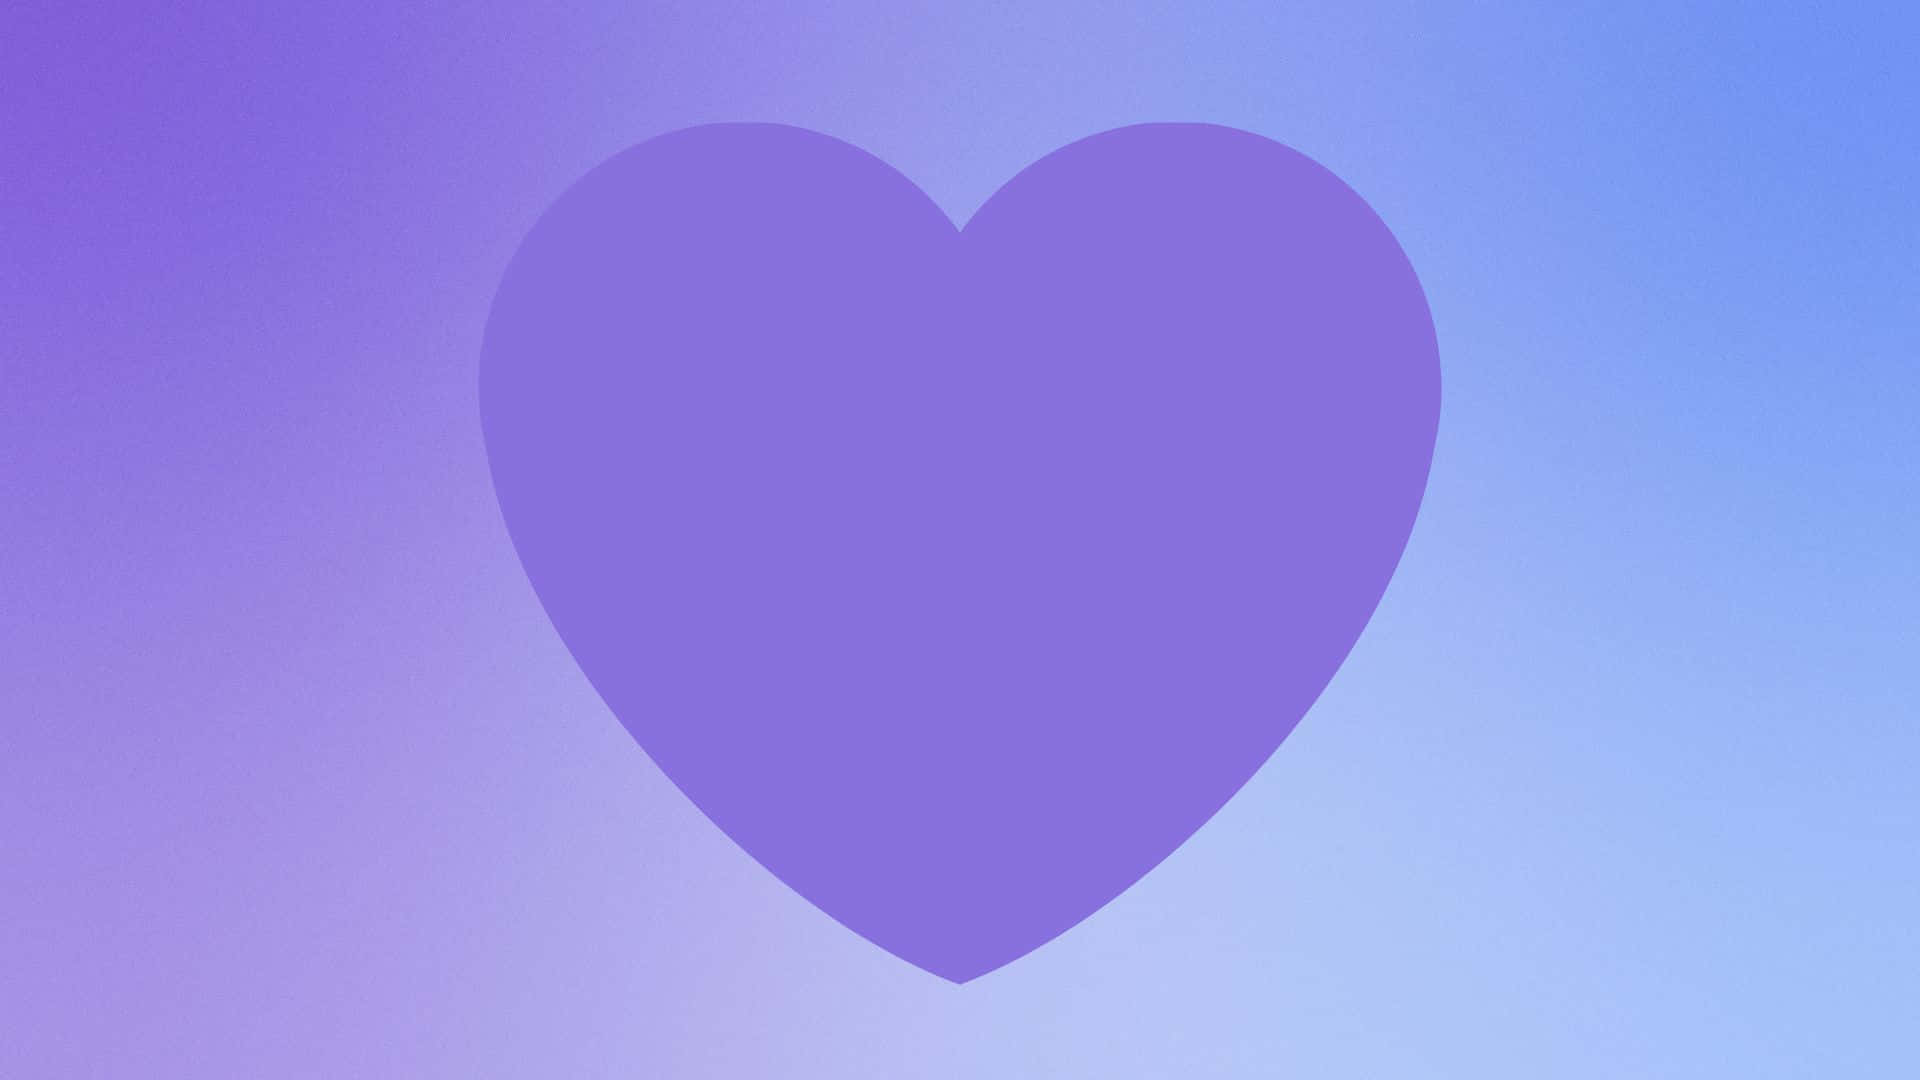 Purple Hearts wallpaper by NikkiFrohloff  Download on ZEDGE  466d